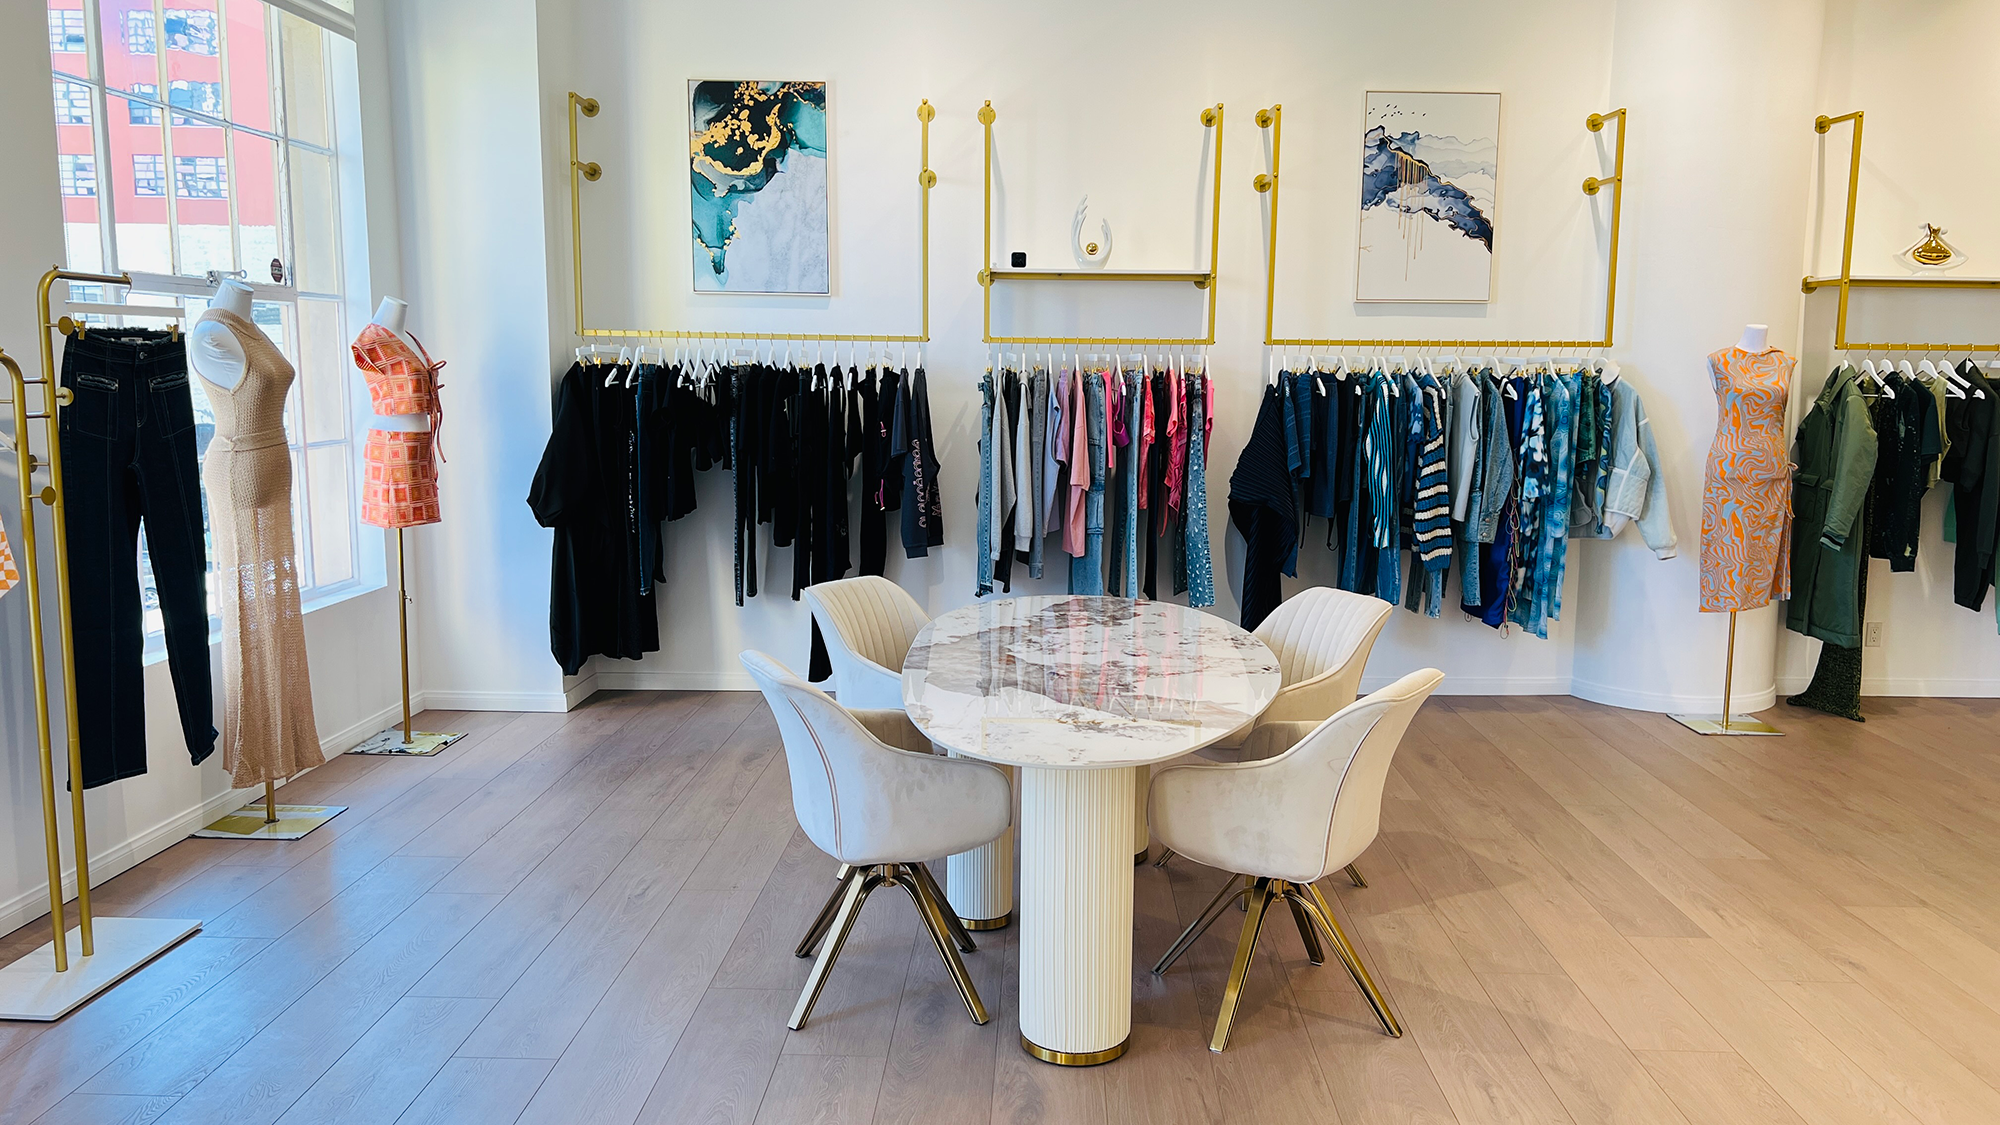 GBS Trend showroom with displays of clothing on hanging rack and marble table in center